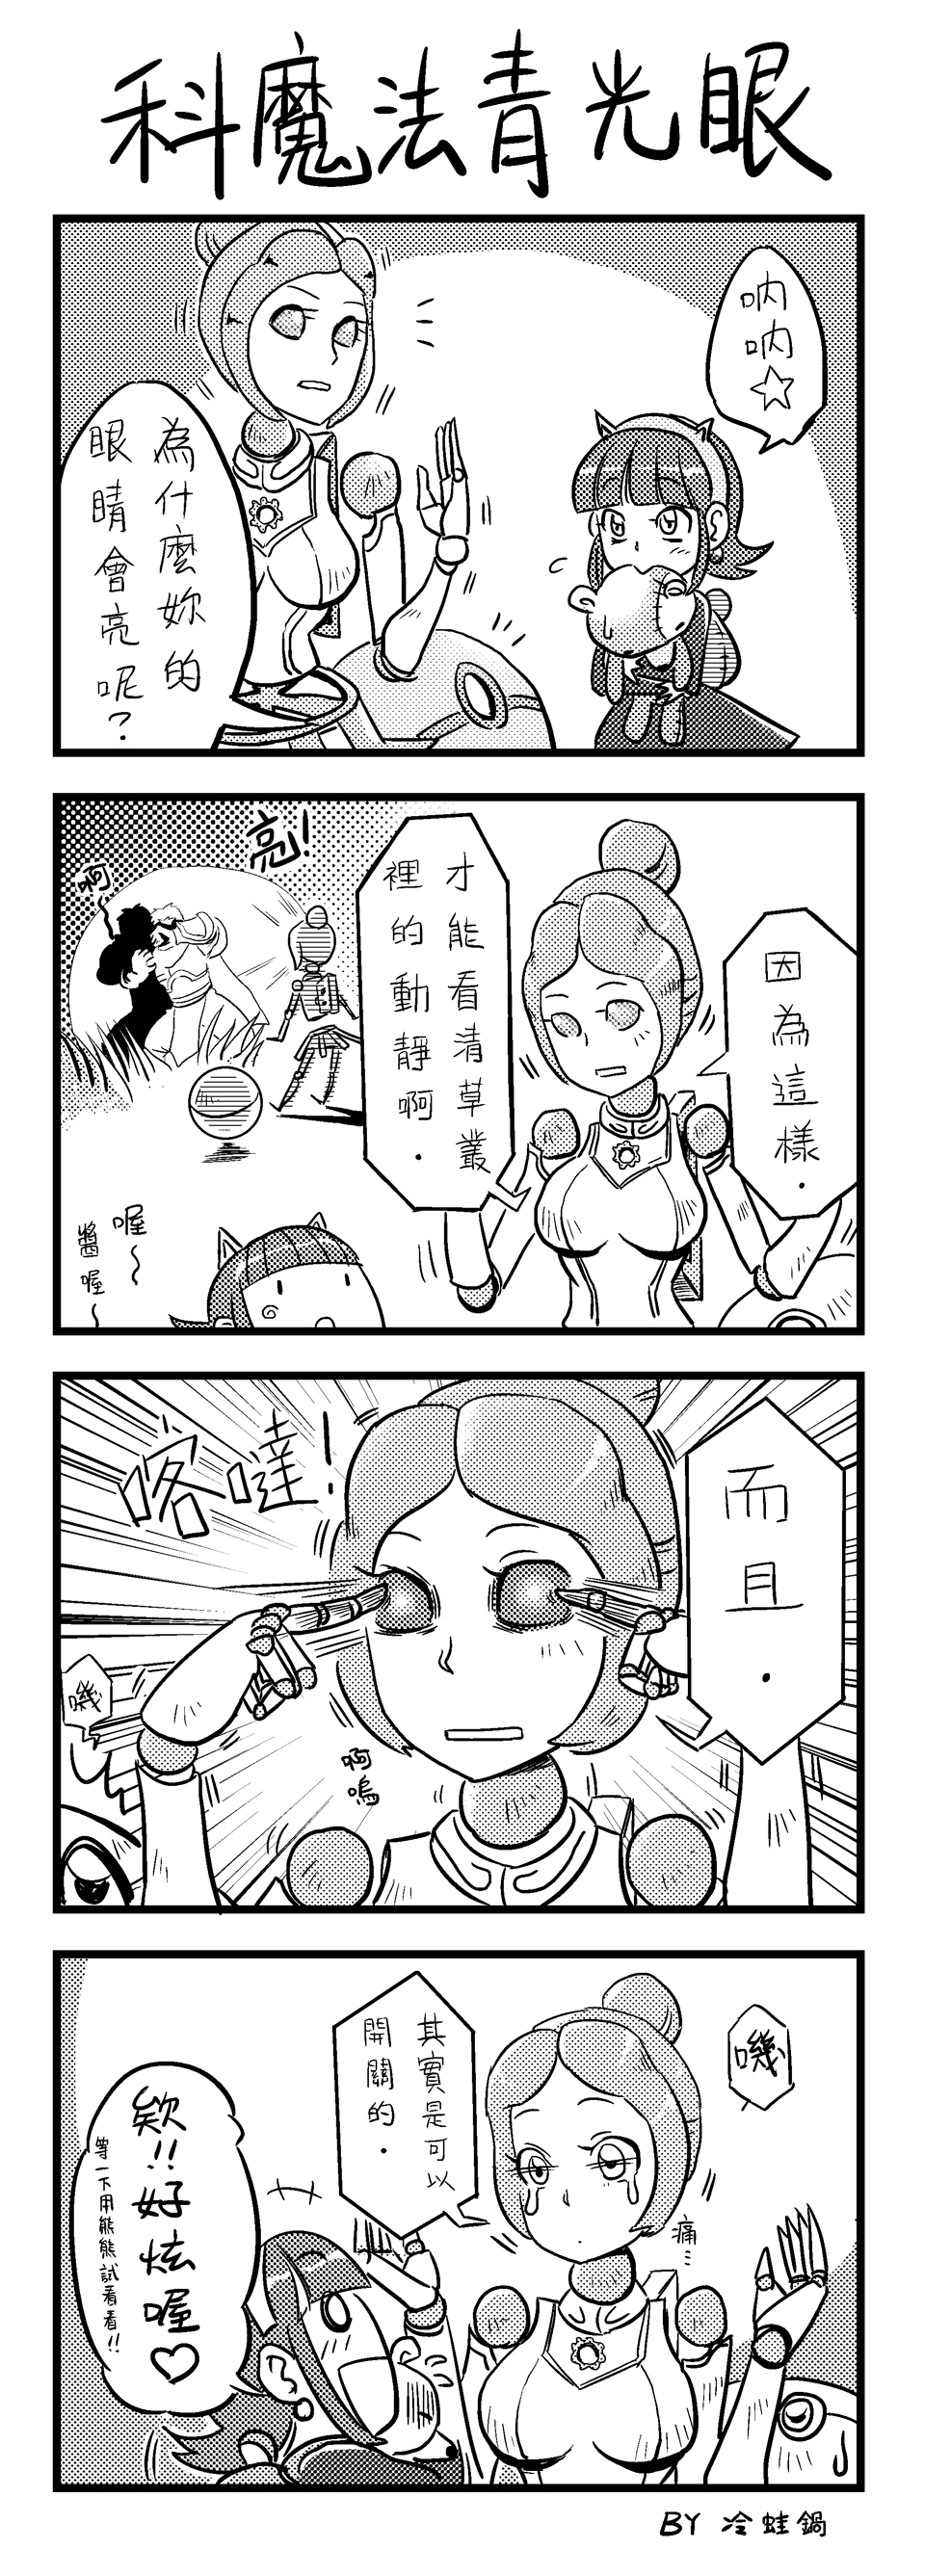 2girls absurdres animal_ears annie_hastur backpack bag chinese comic garen_crownguard greyscale highres league_of_legends leng_wa_guo monochrome multiple_girls orianna_reveck short_hair stuffed_animal stuffed_toy tears translated